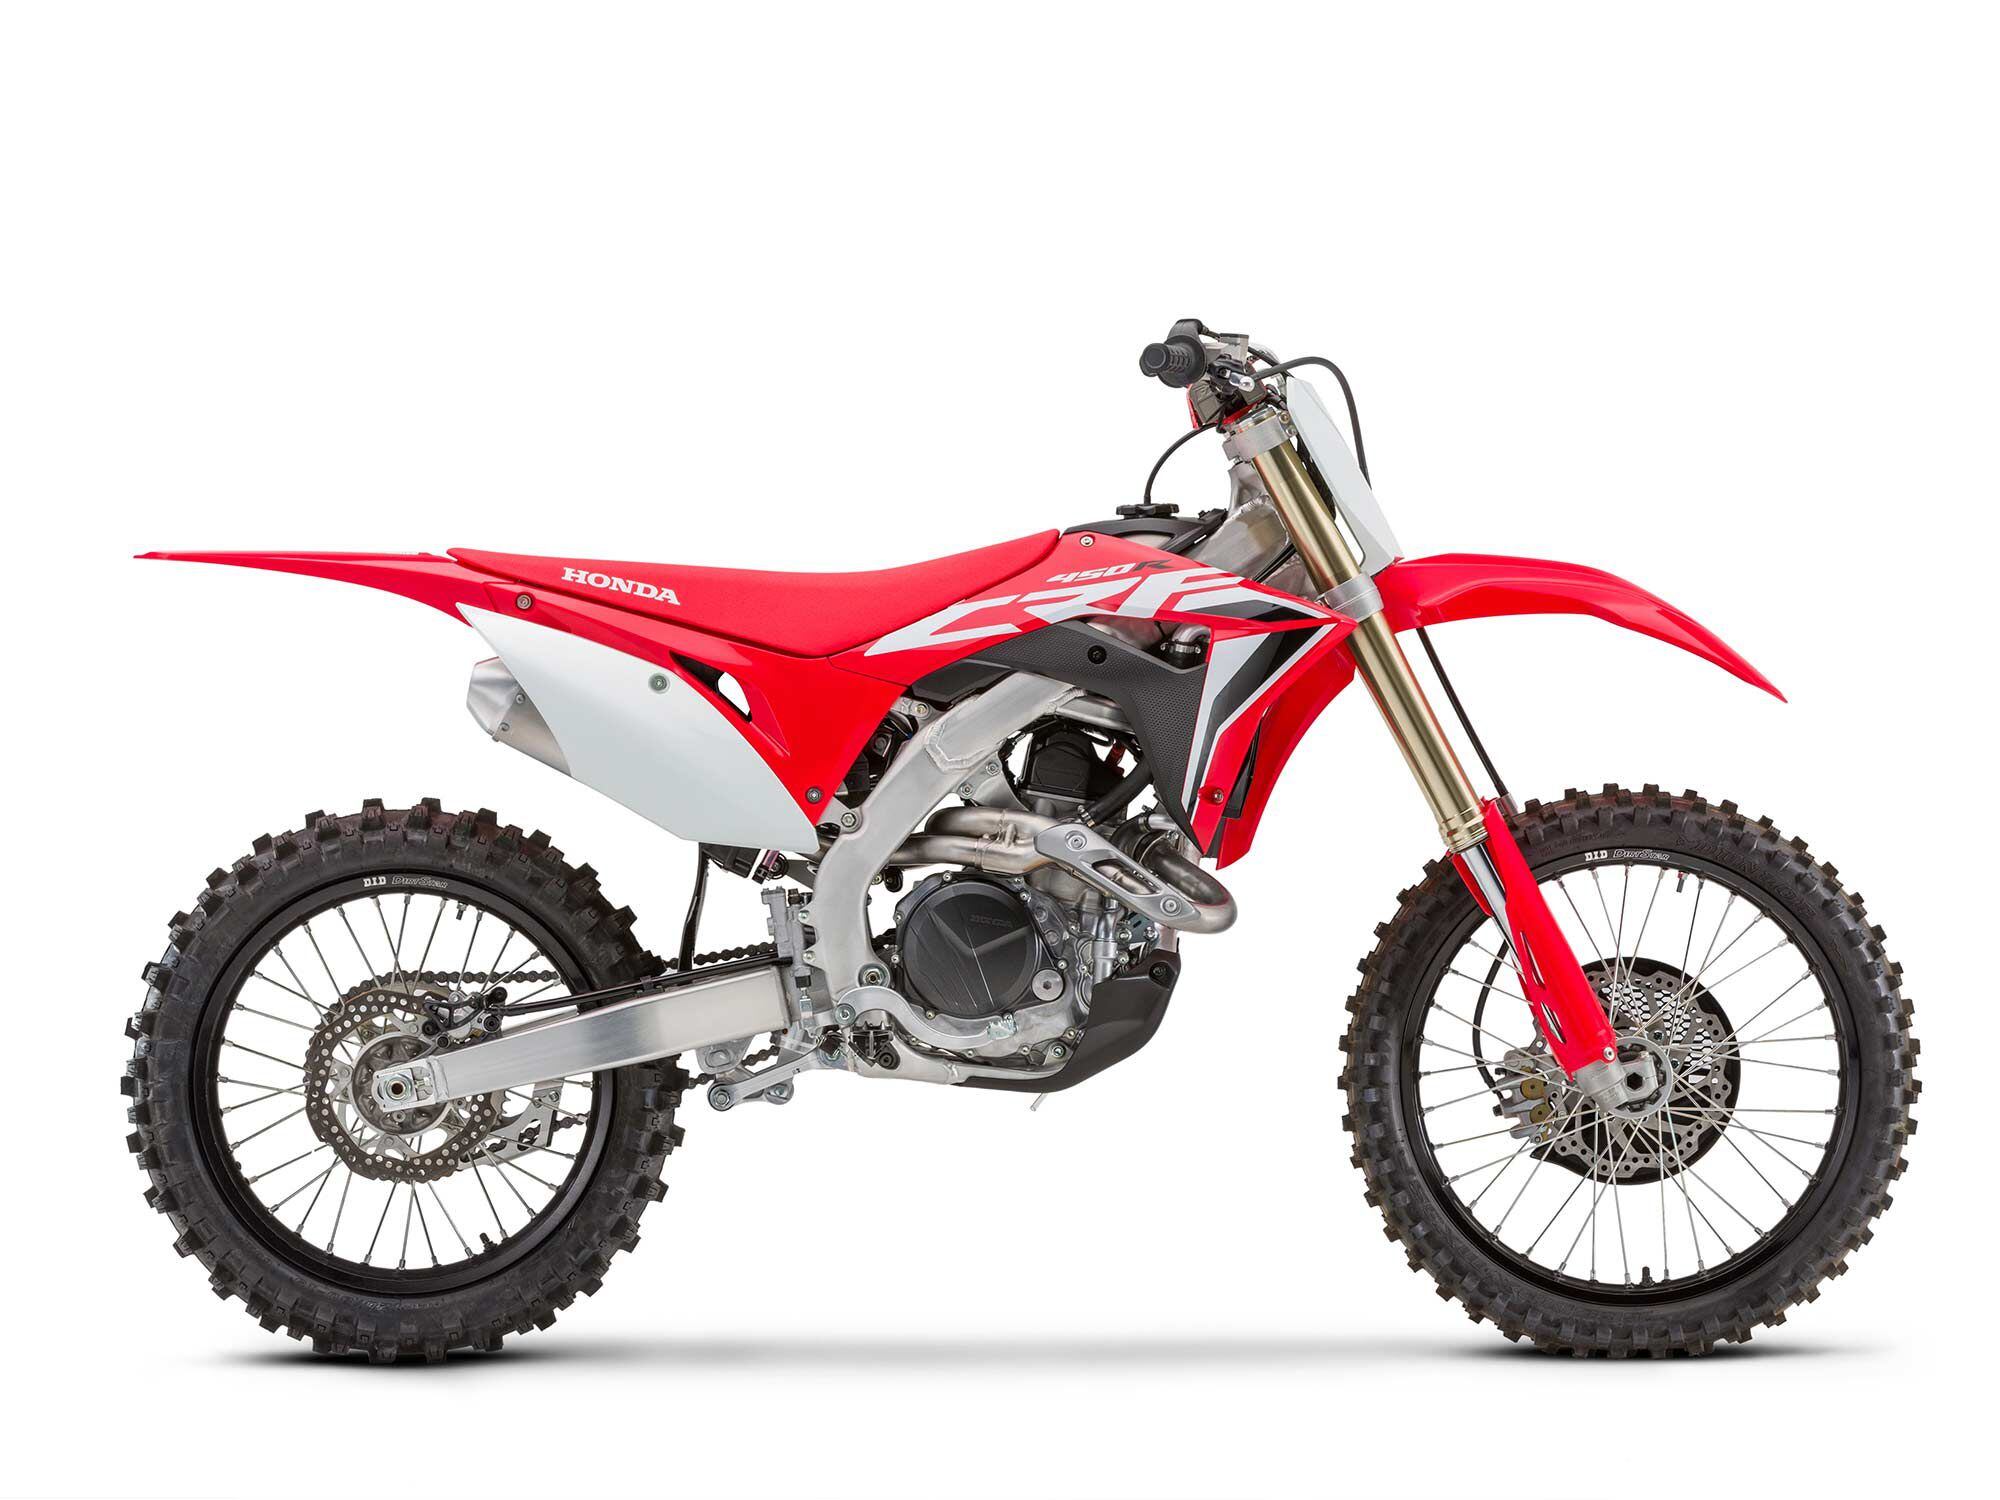 At $8,599, the CRF450R-S is friendlier to the bank account.